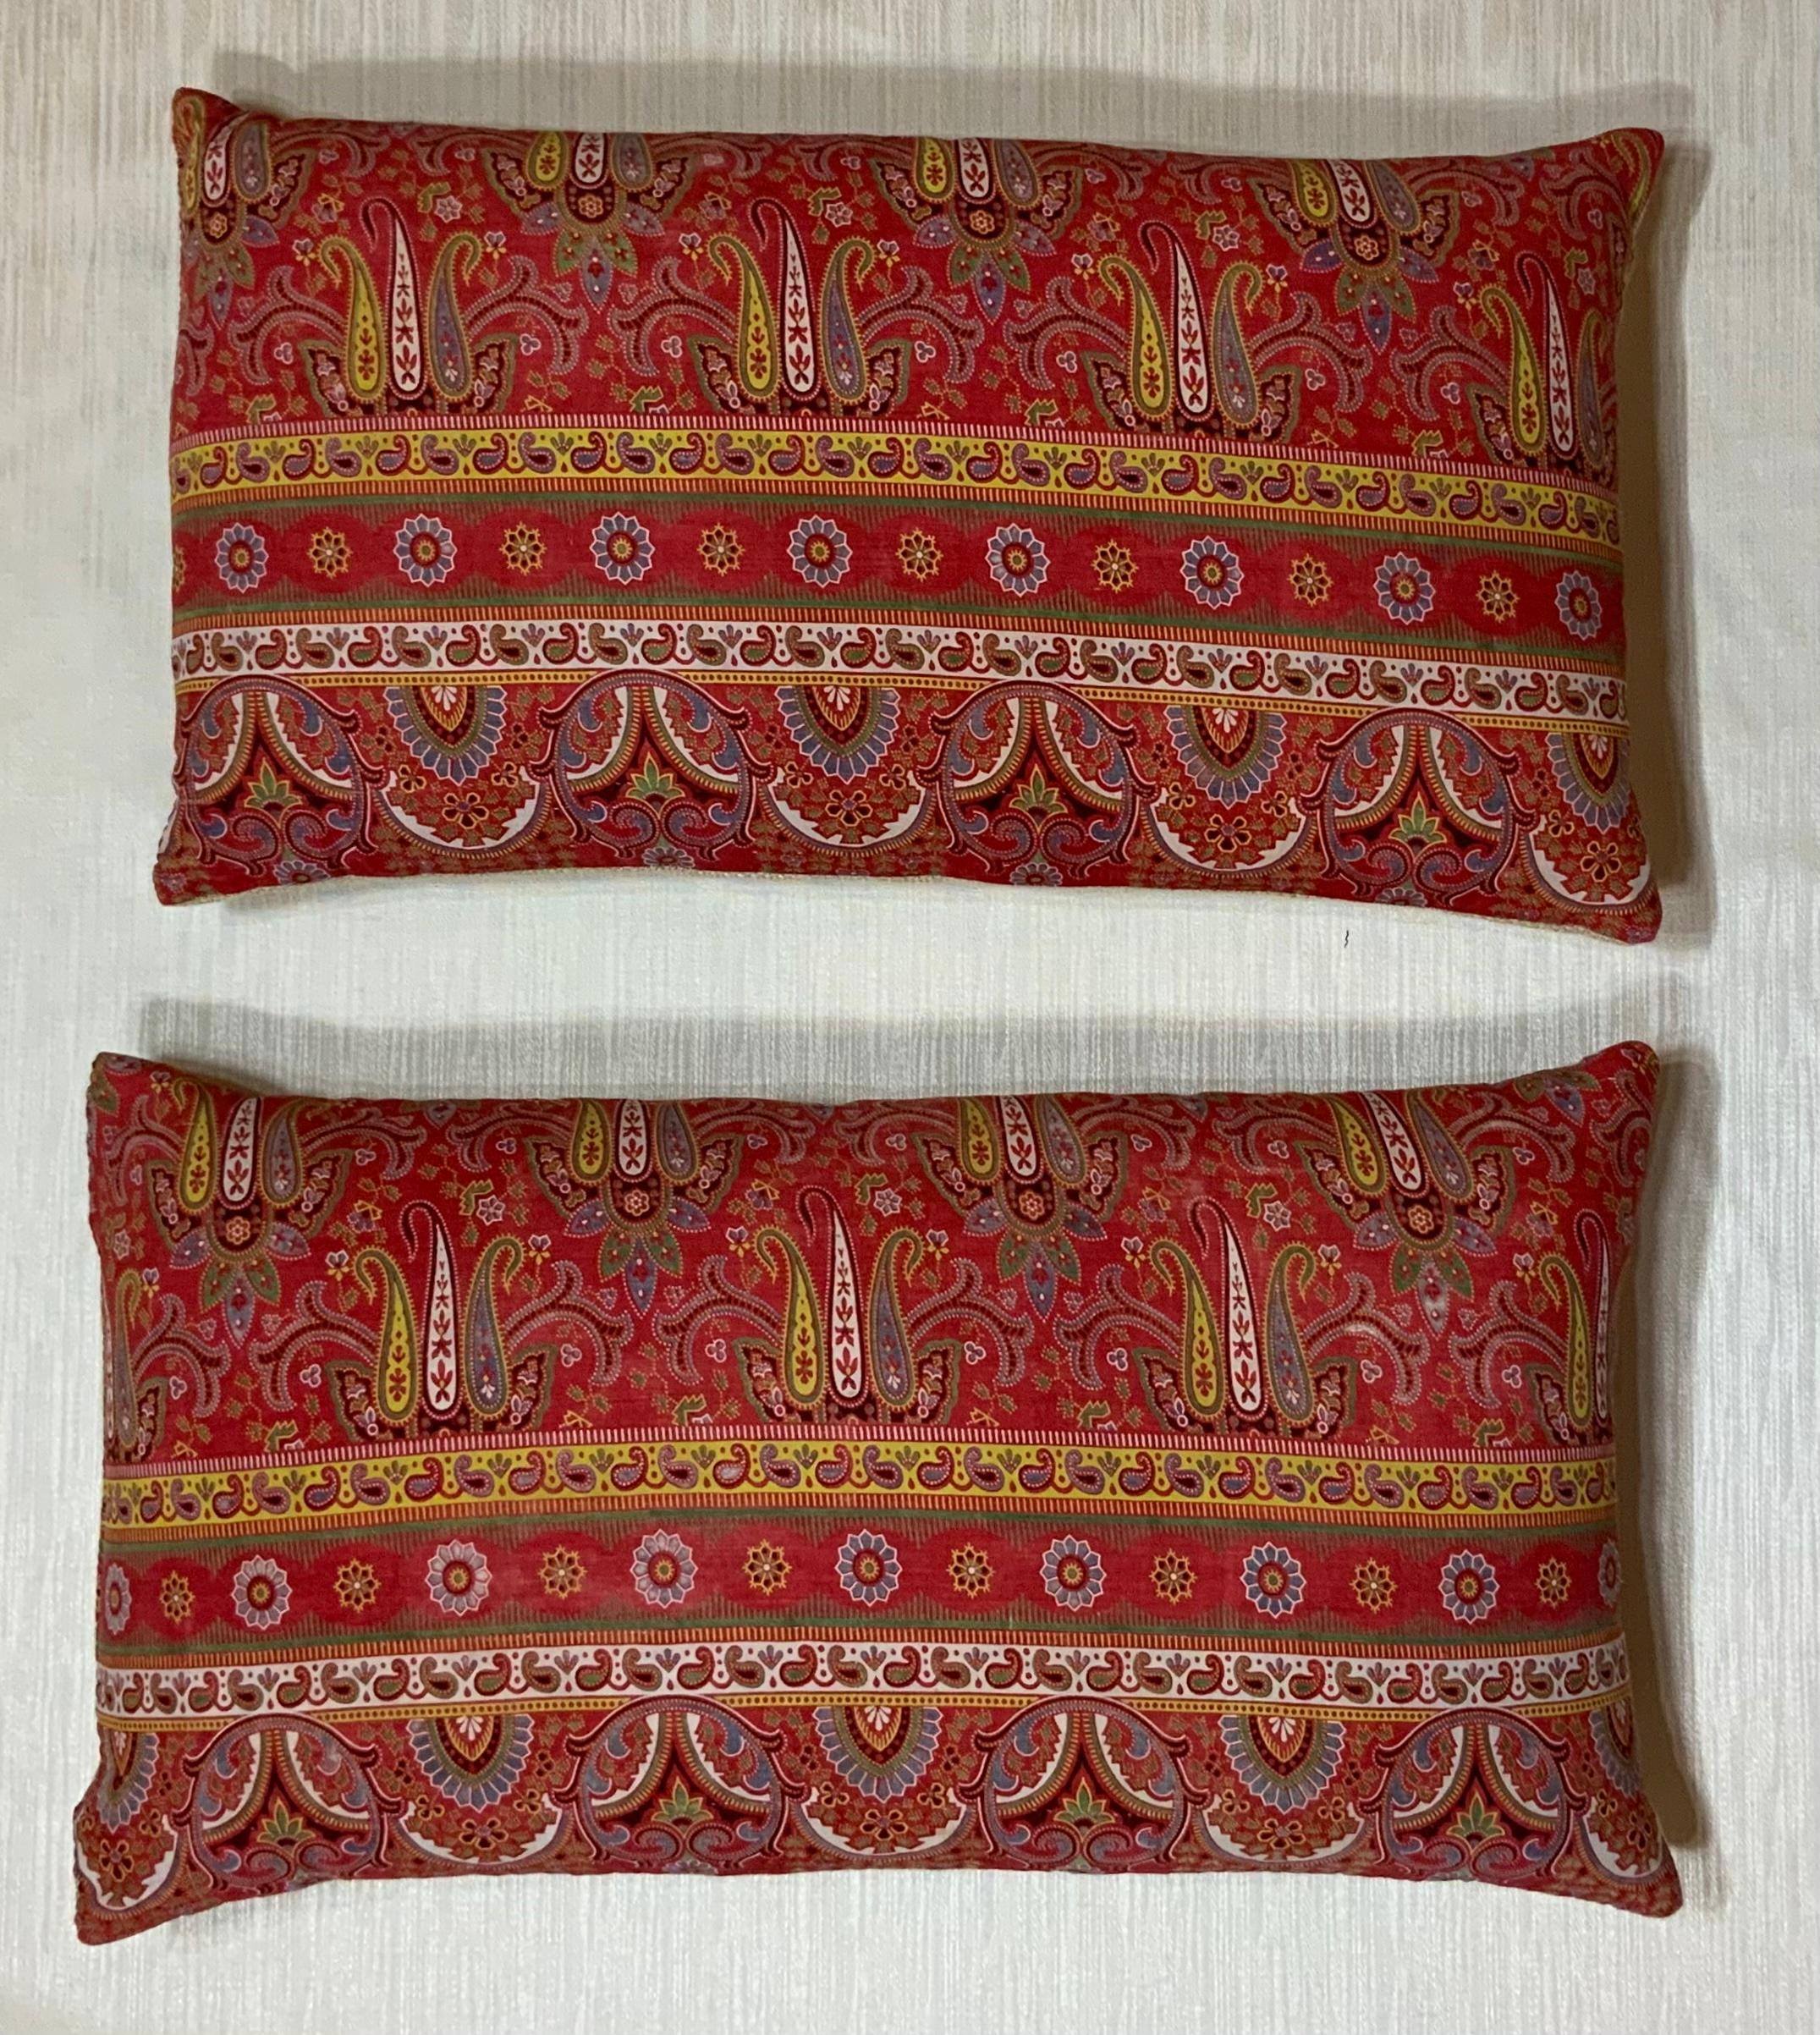 Beautiful pair of pillows made of antique Russian print textile, exceptional vivid floral motifs
Find cotton backing, fresh quality insert.
Sizes
21” x 11”.5
20” x 11.5.